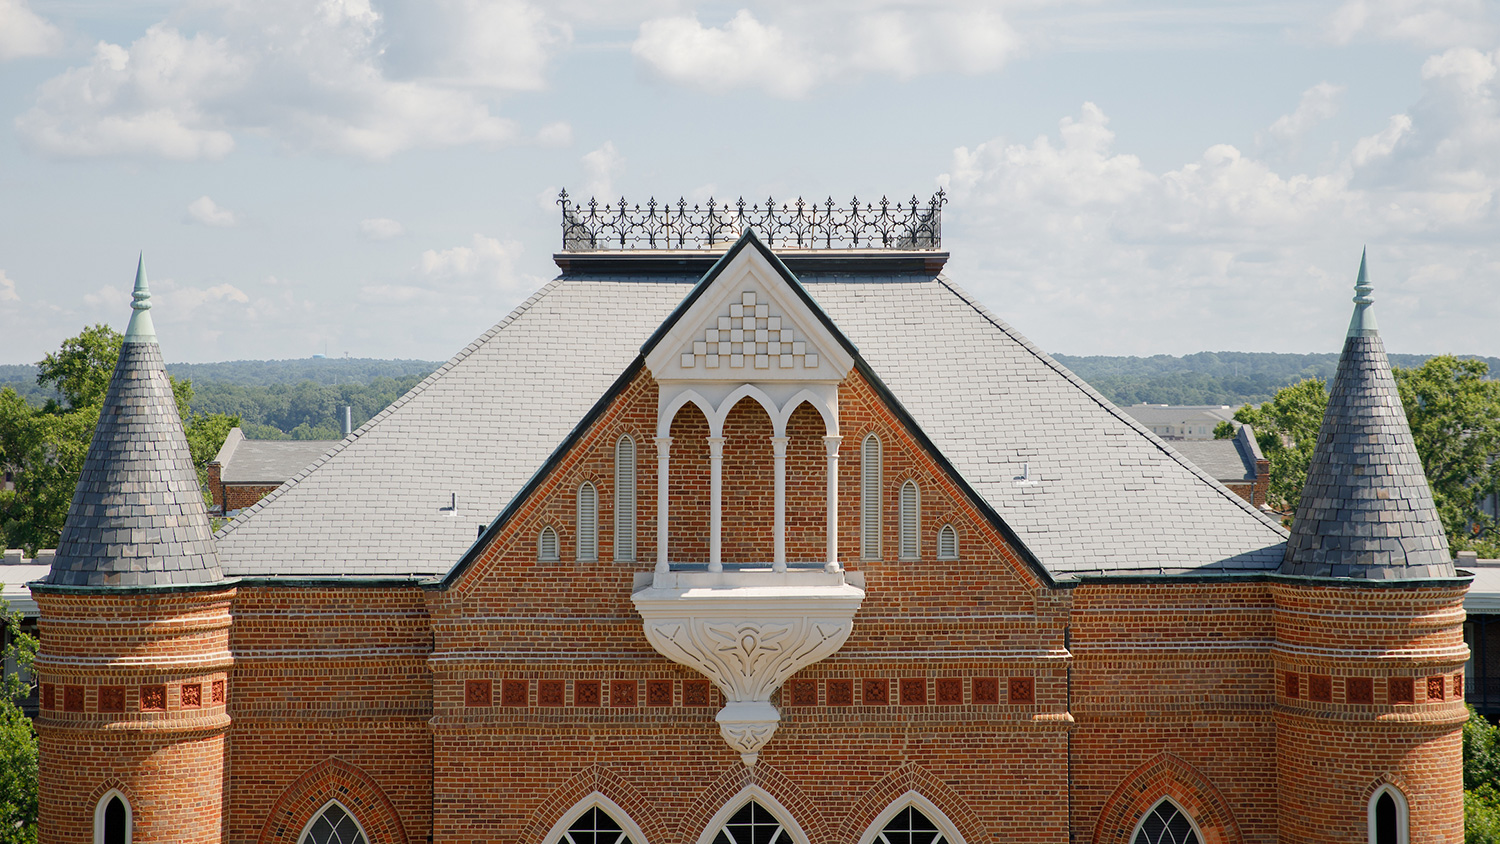 Clark Hall roof and spires